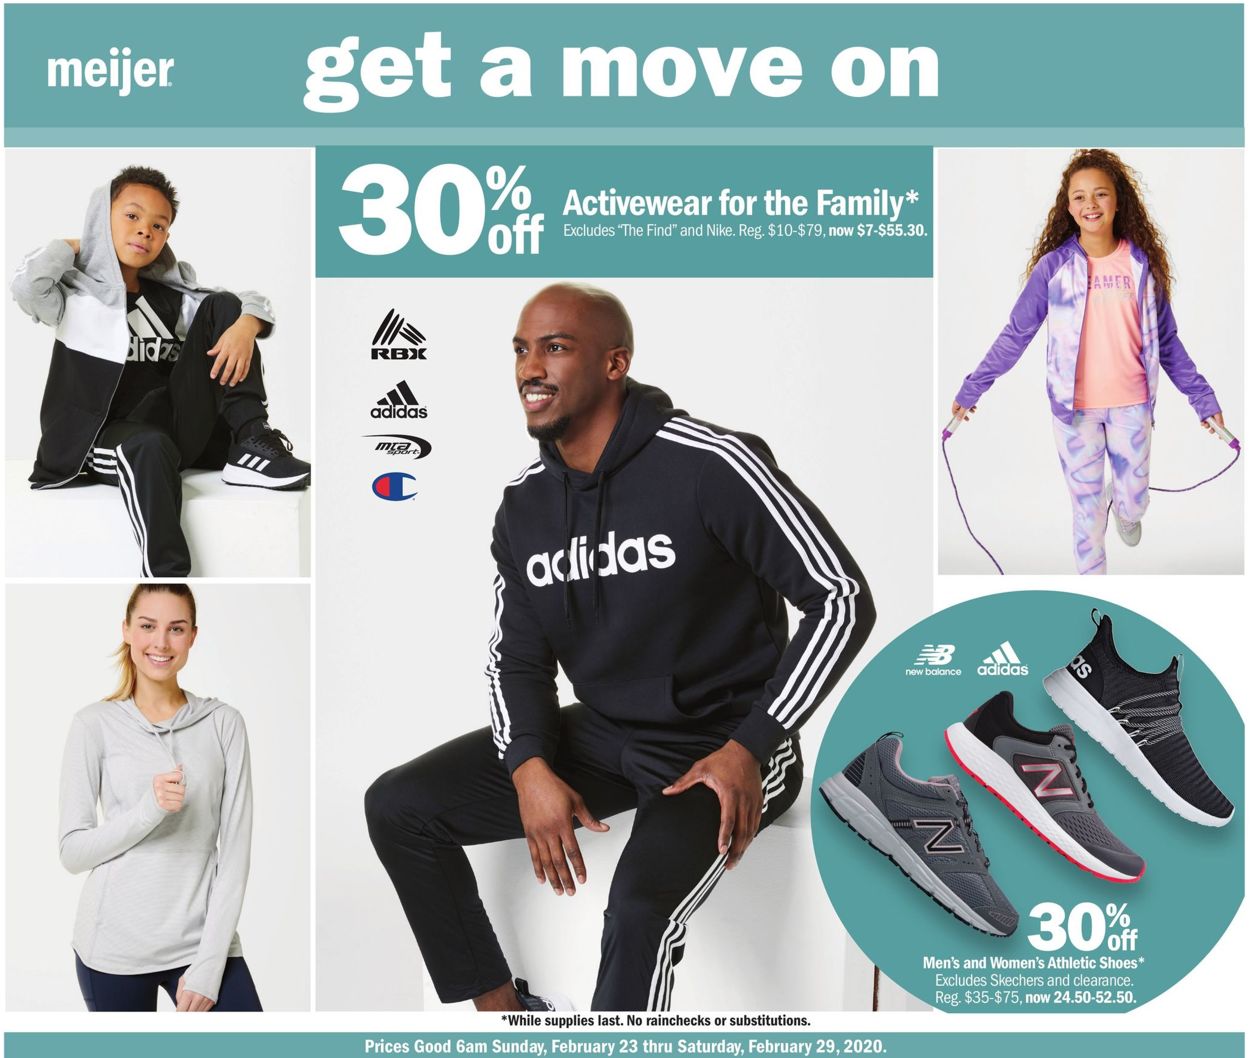 meijer adidas shoes